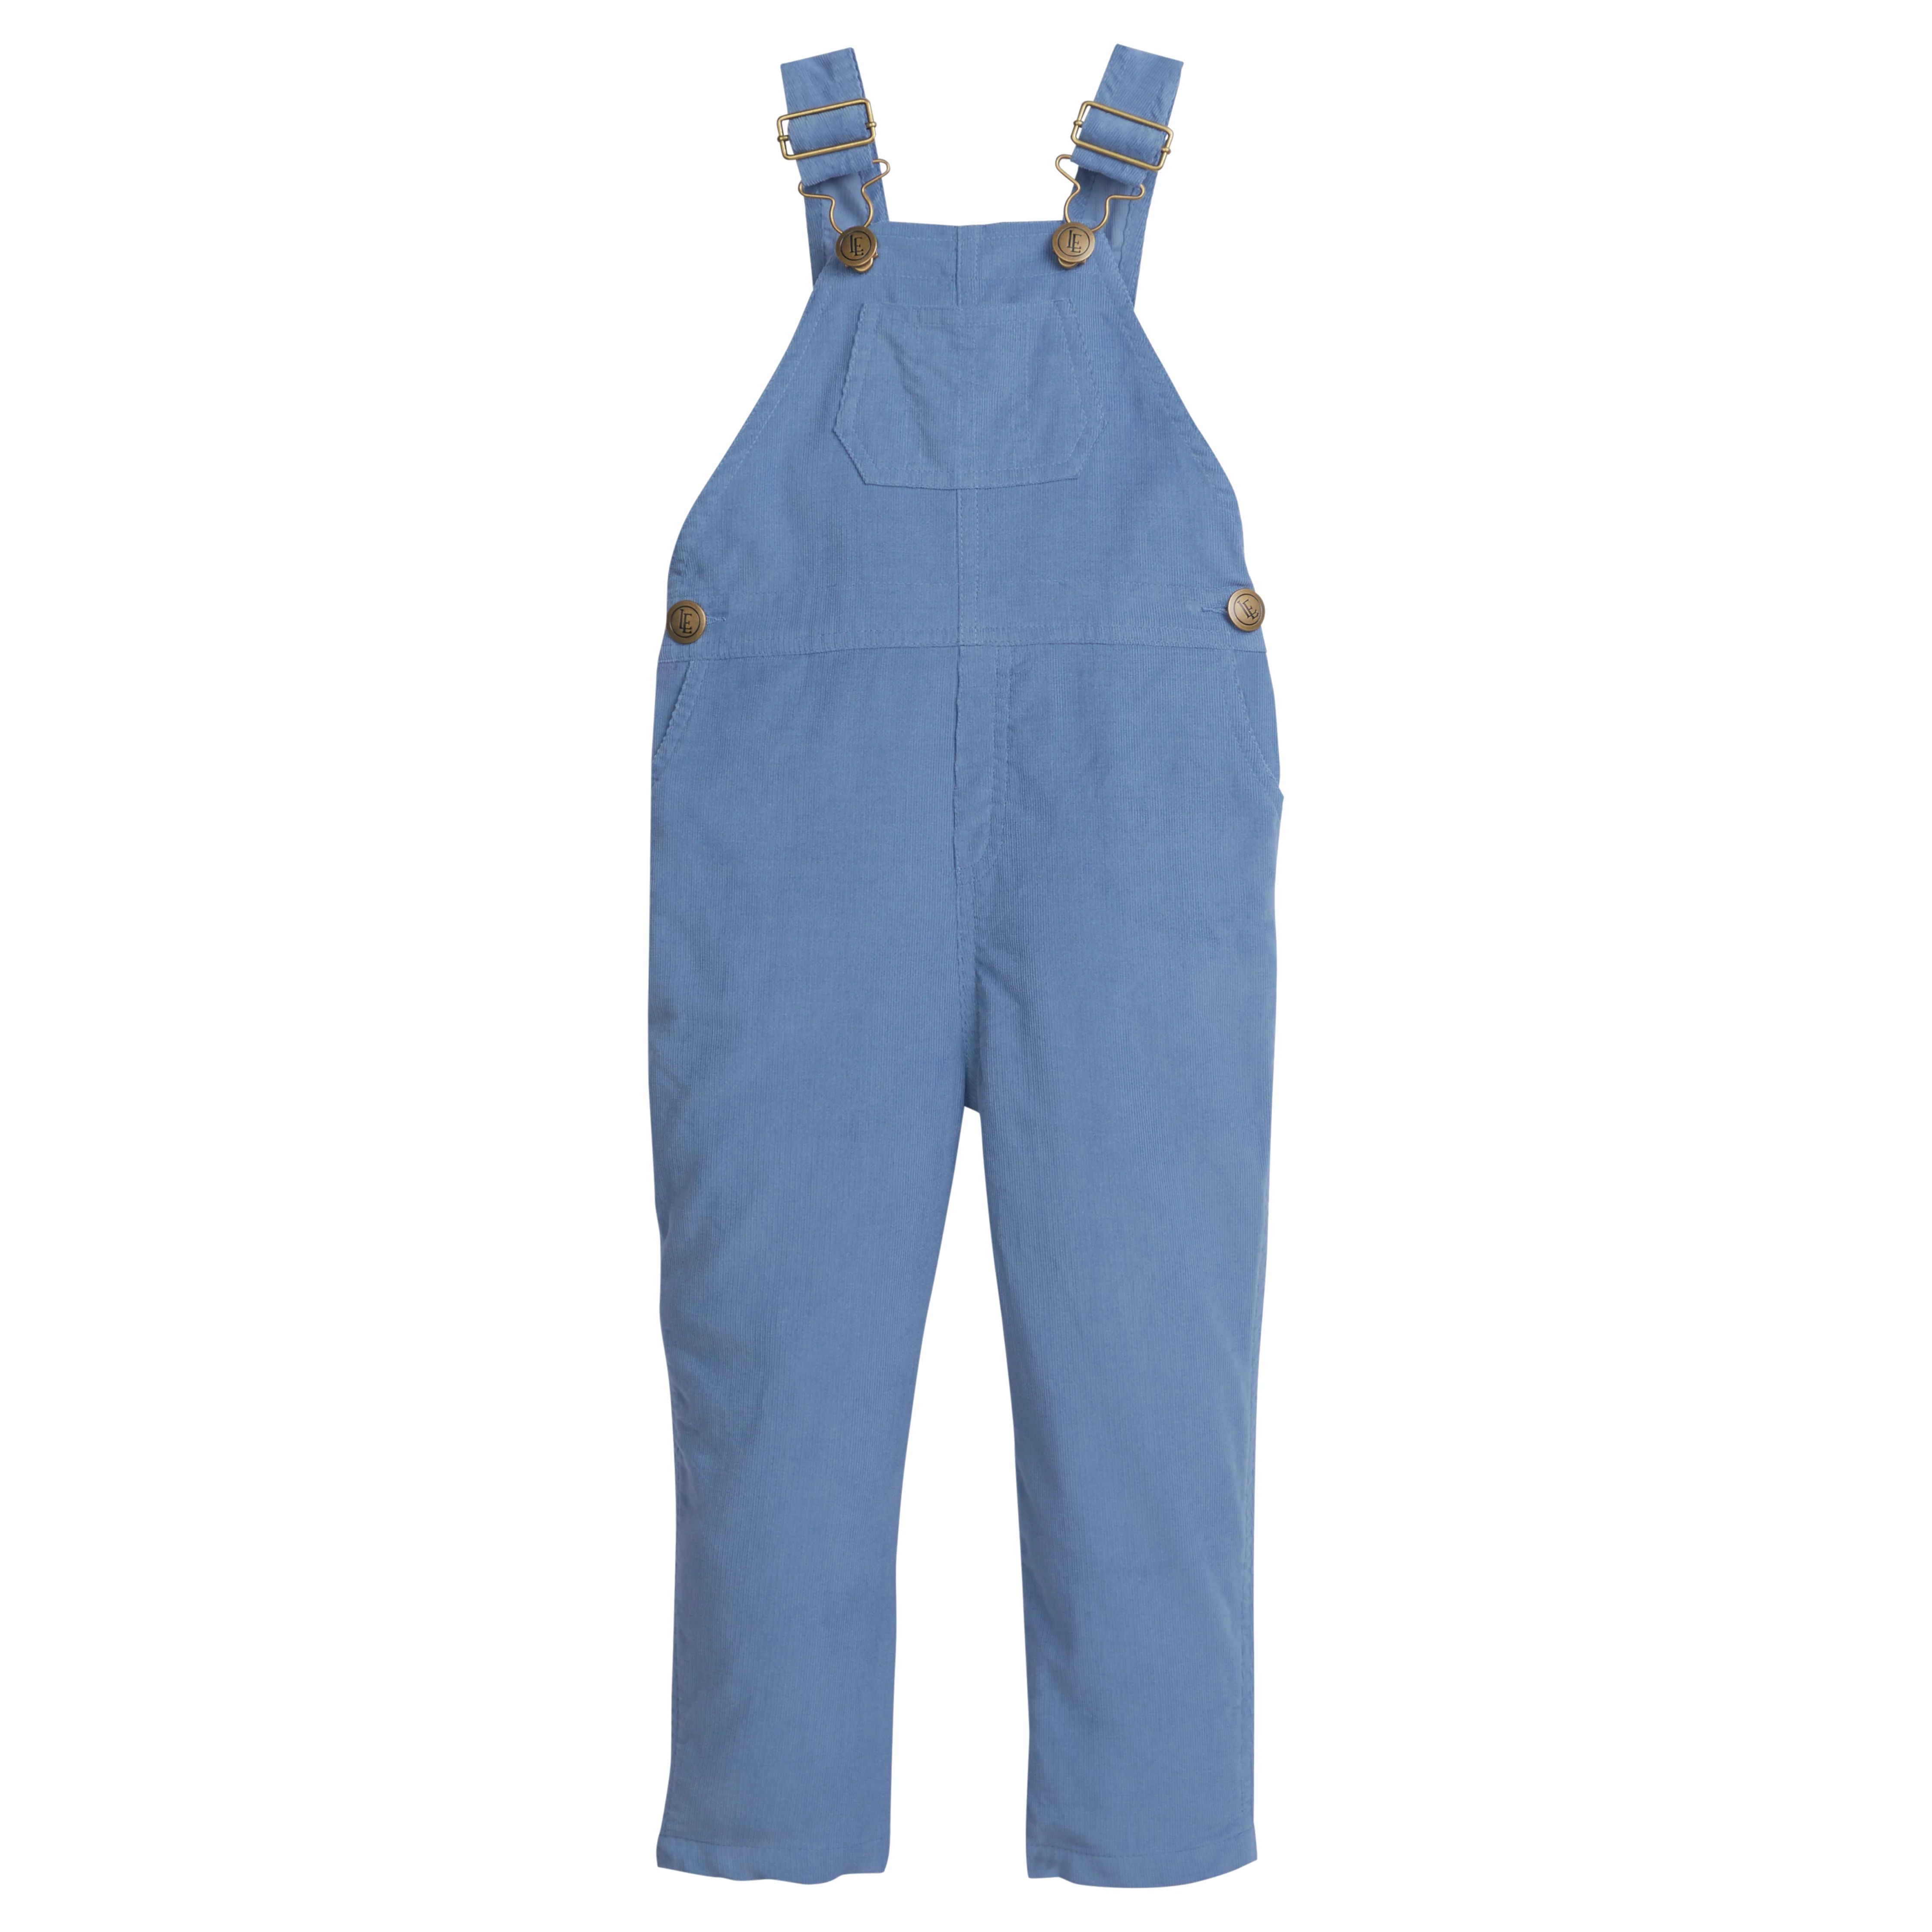 Classic Children's Clothing - Corduroy Overalls | Little English